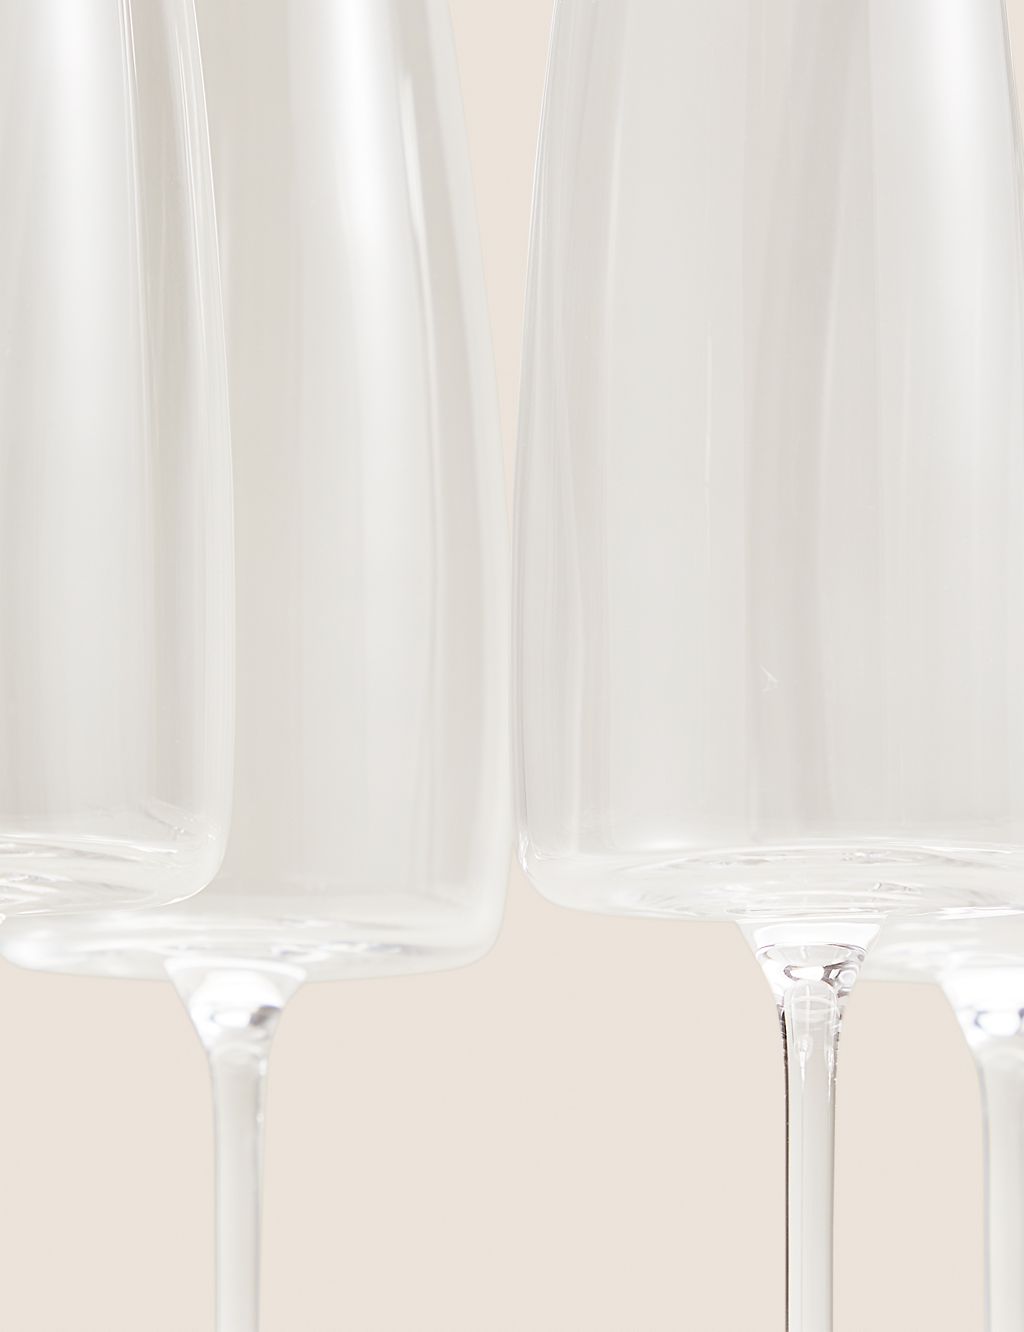 Set of 4 Contemporary Champagne Flutes 2 of 3